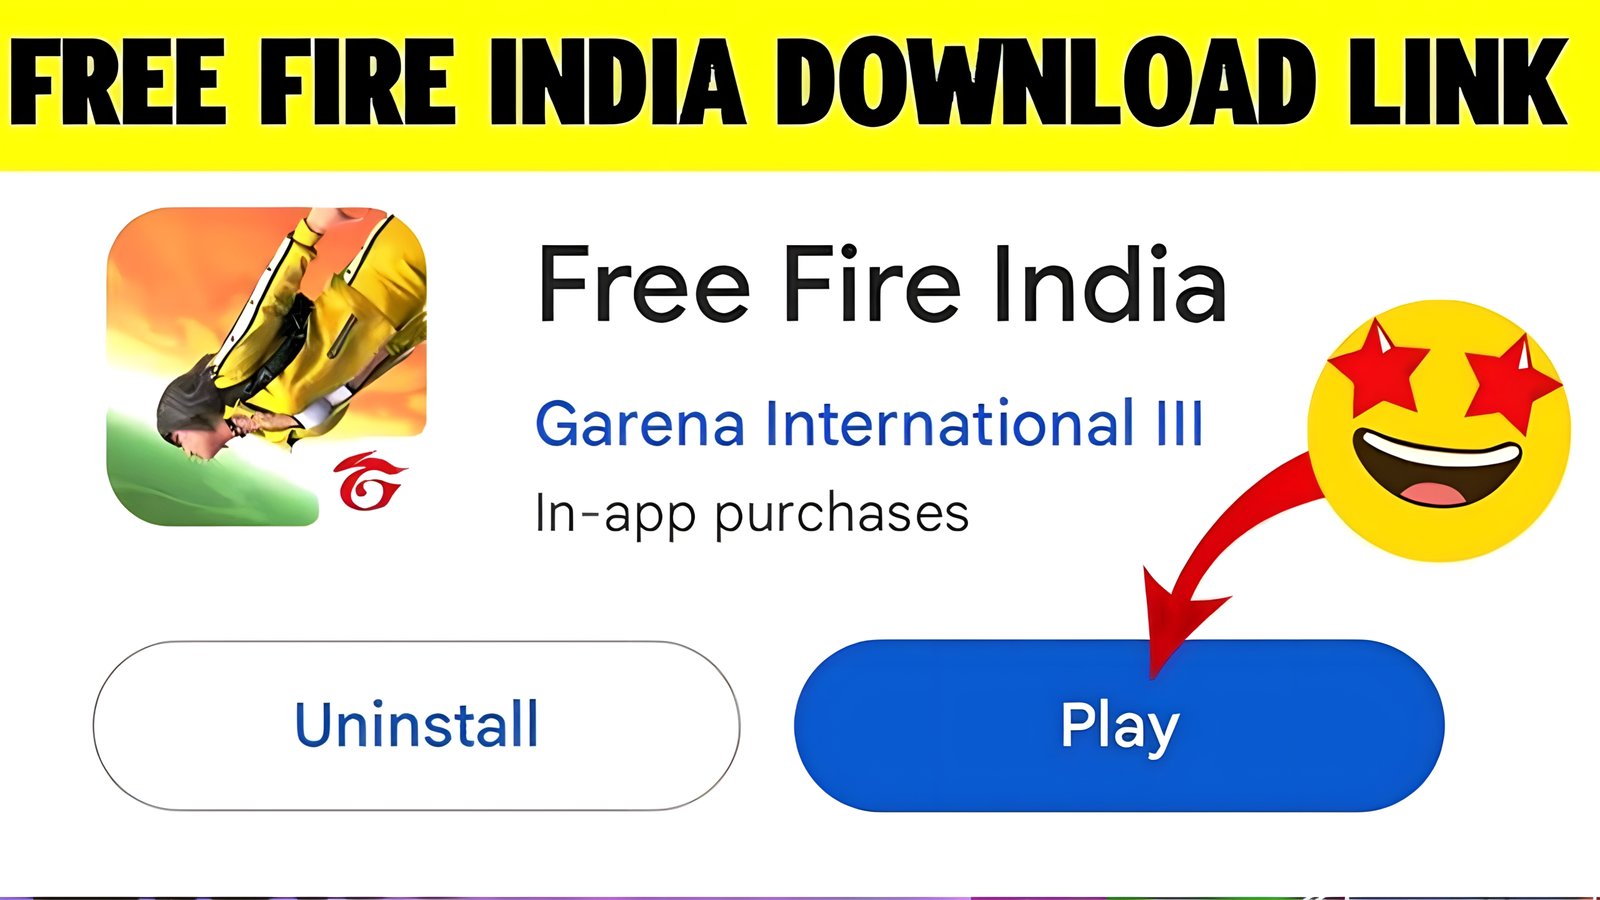 Free Fire India Today